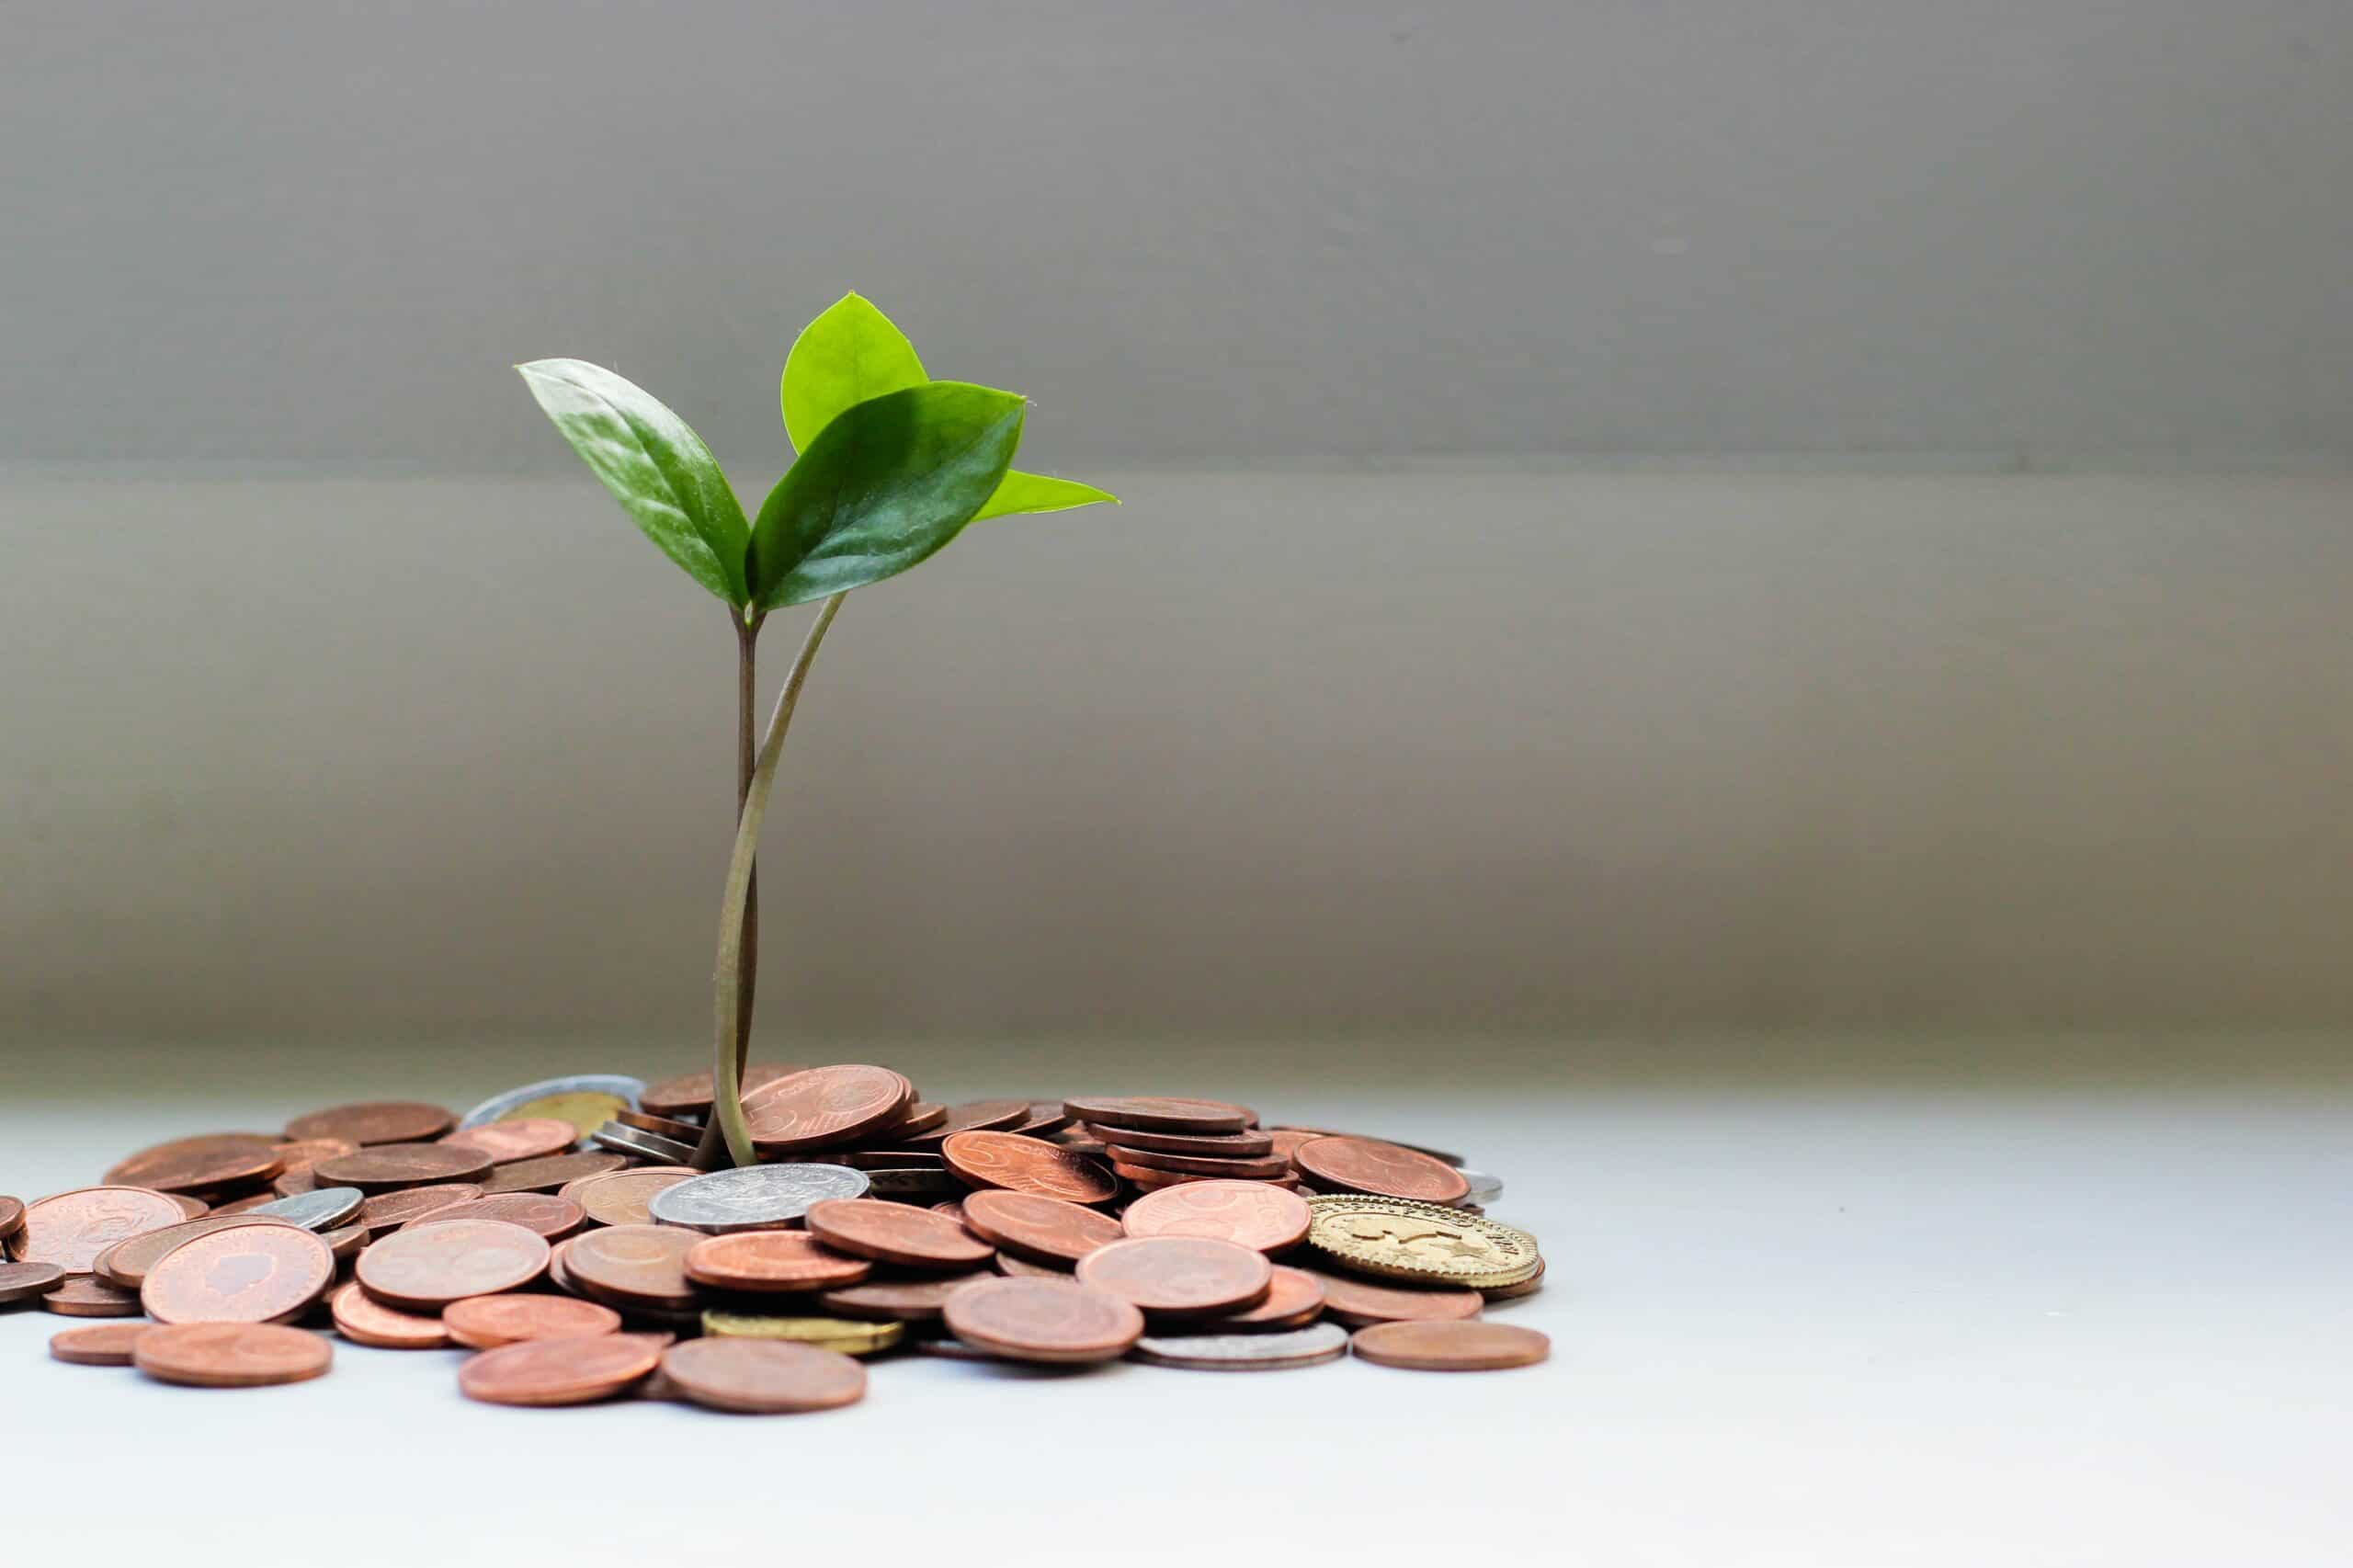 Small, green tree growing out of a pile of coins.